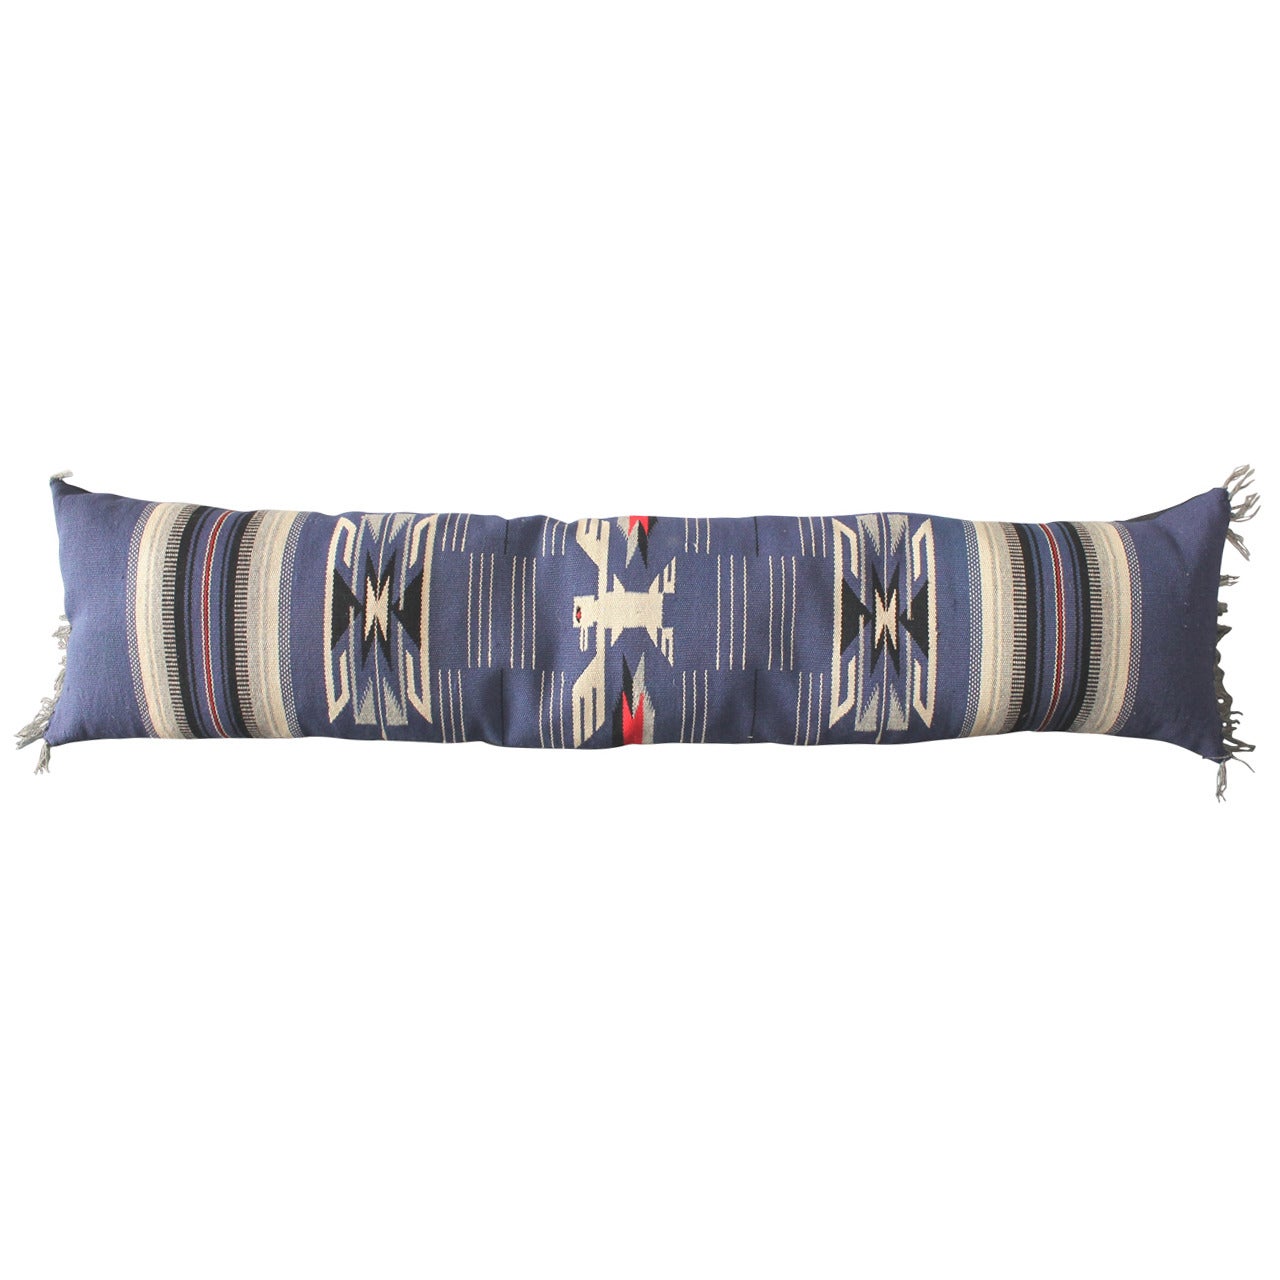 Monumental Mexican Indian Weaving Bolster Pillow with a Eagle Motif